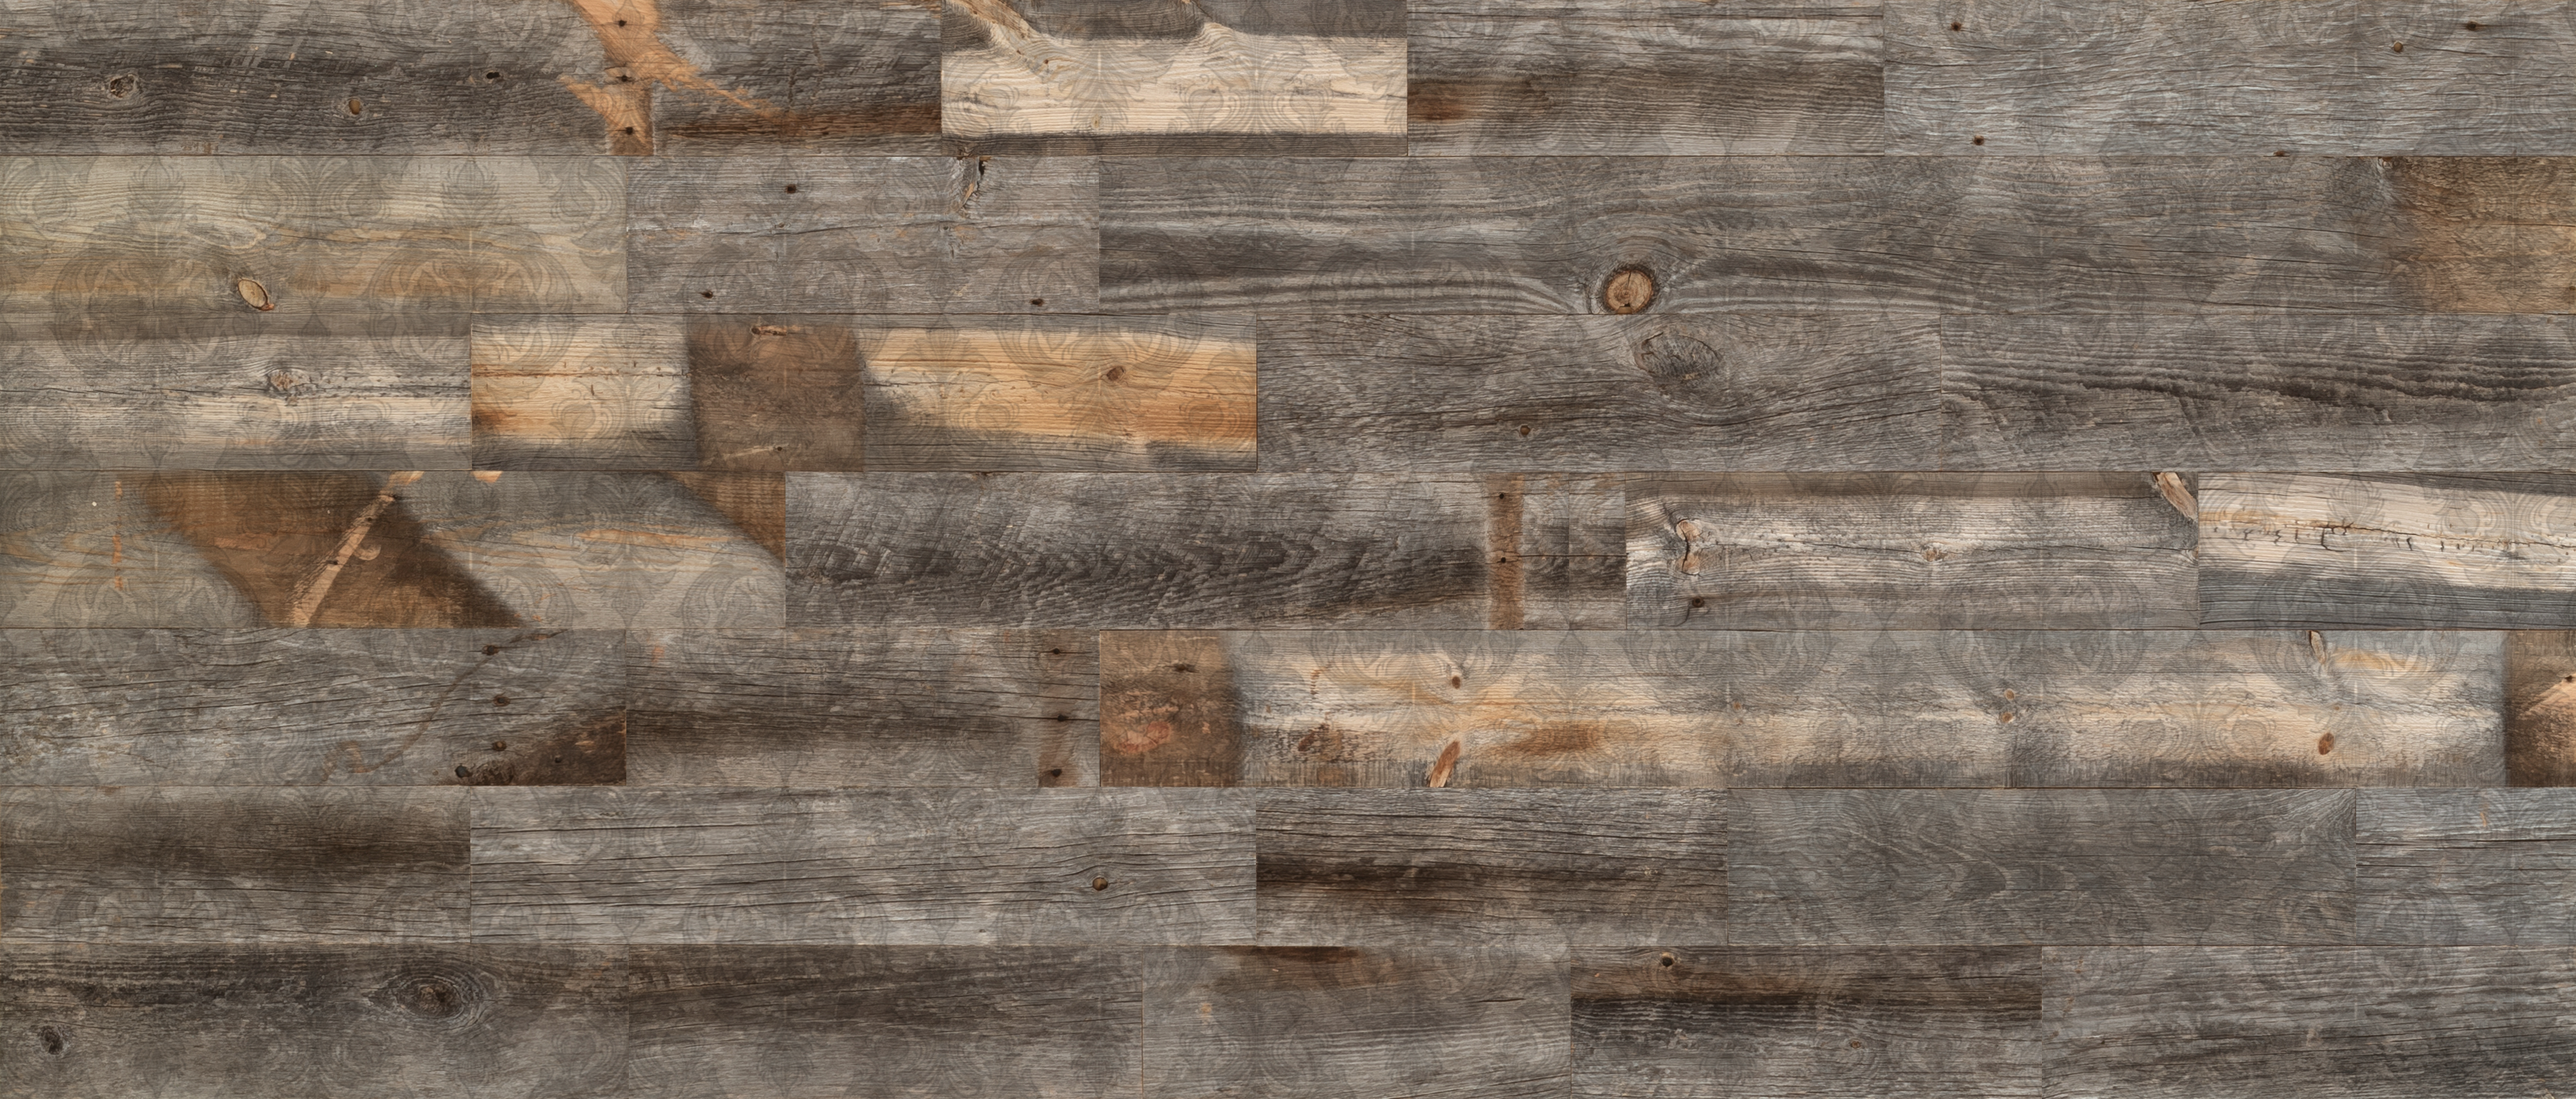 Stikwood Plankprint Reclaimed Victoria material explorer | real reclaimed barnwood pine peel and stick wood wall and ceiling planks with silver, gray, tan, black and brown colors and a printed pattern..